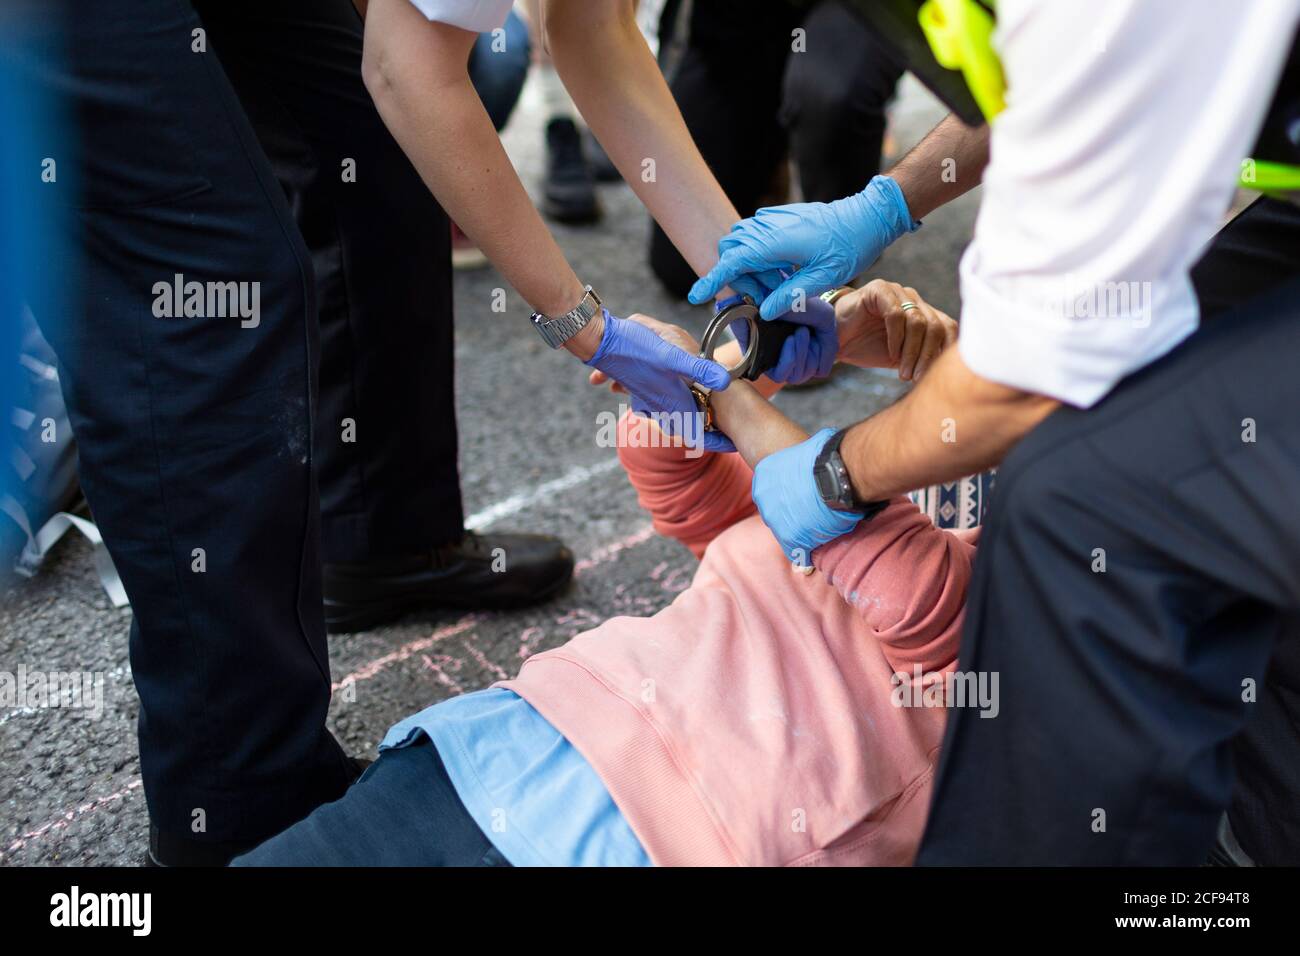 Police officers place handcuffs on a protester blocking road during Extinction Rebellion demonstration, London, 1 September 2020 Stock Photo